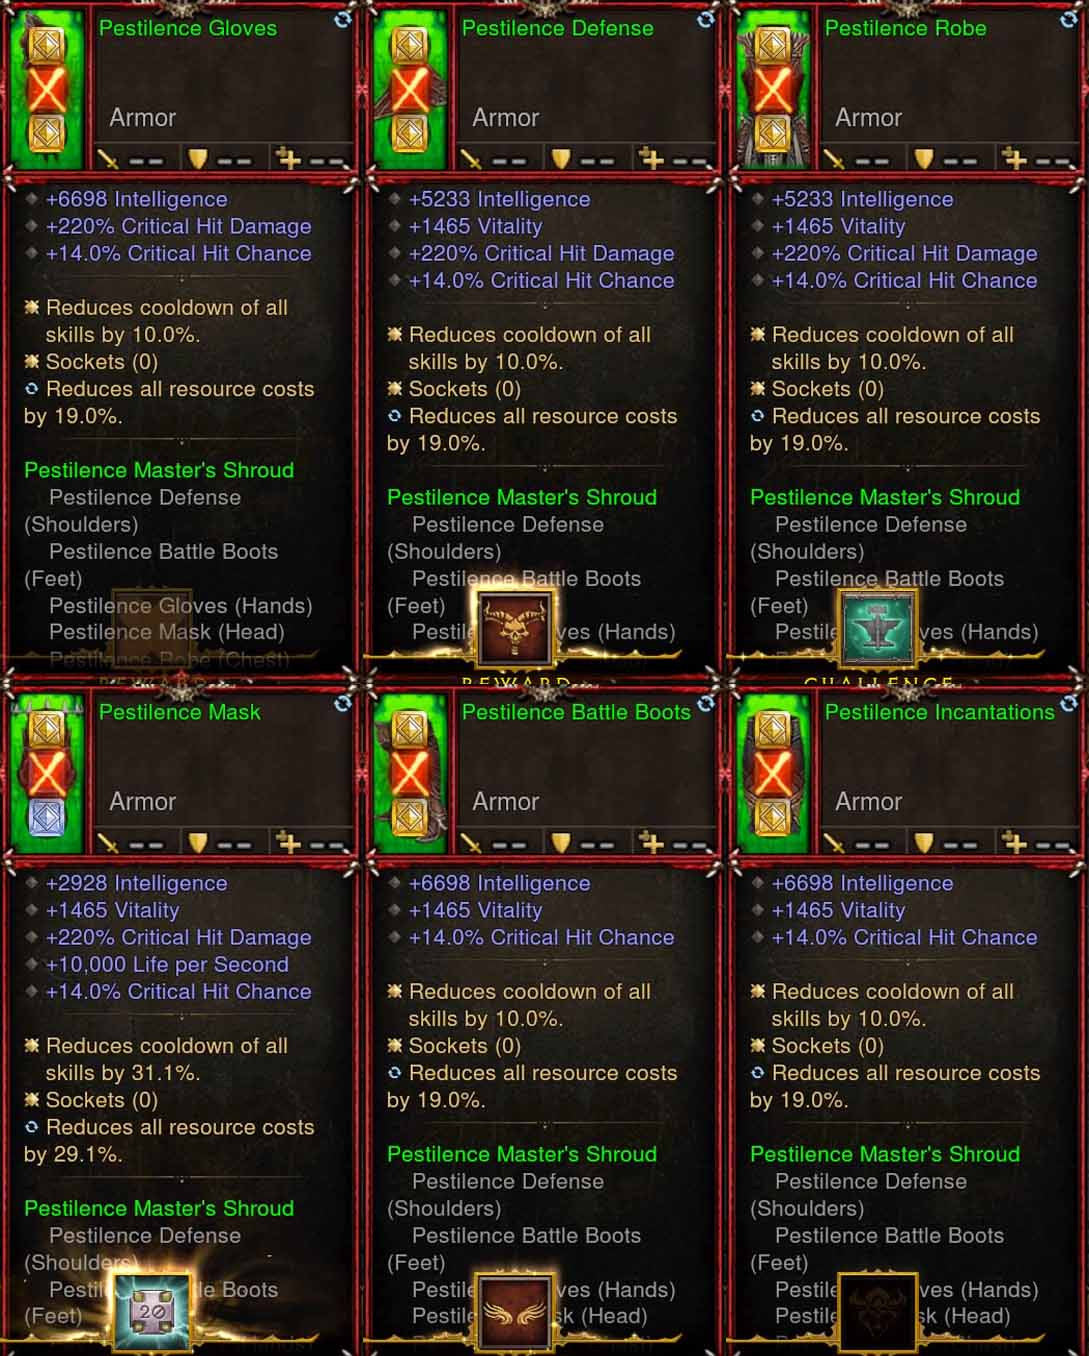 [Primal Ancient] 6x Pestilence Necromancer Set Diablo 3 Mods ROS Seasonal and Non Seasonal Save Mod - Modded Items and Gear - Hacks - Cheats - Trainers for Playstation 4 - Playstation 5 - Nintendo Switch - Xbox One